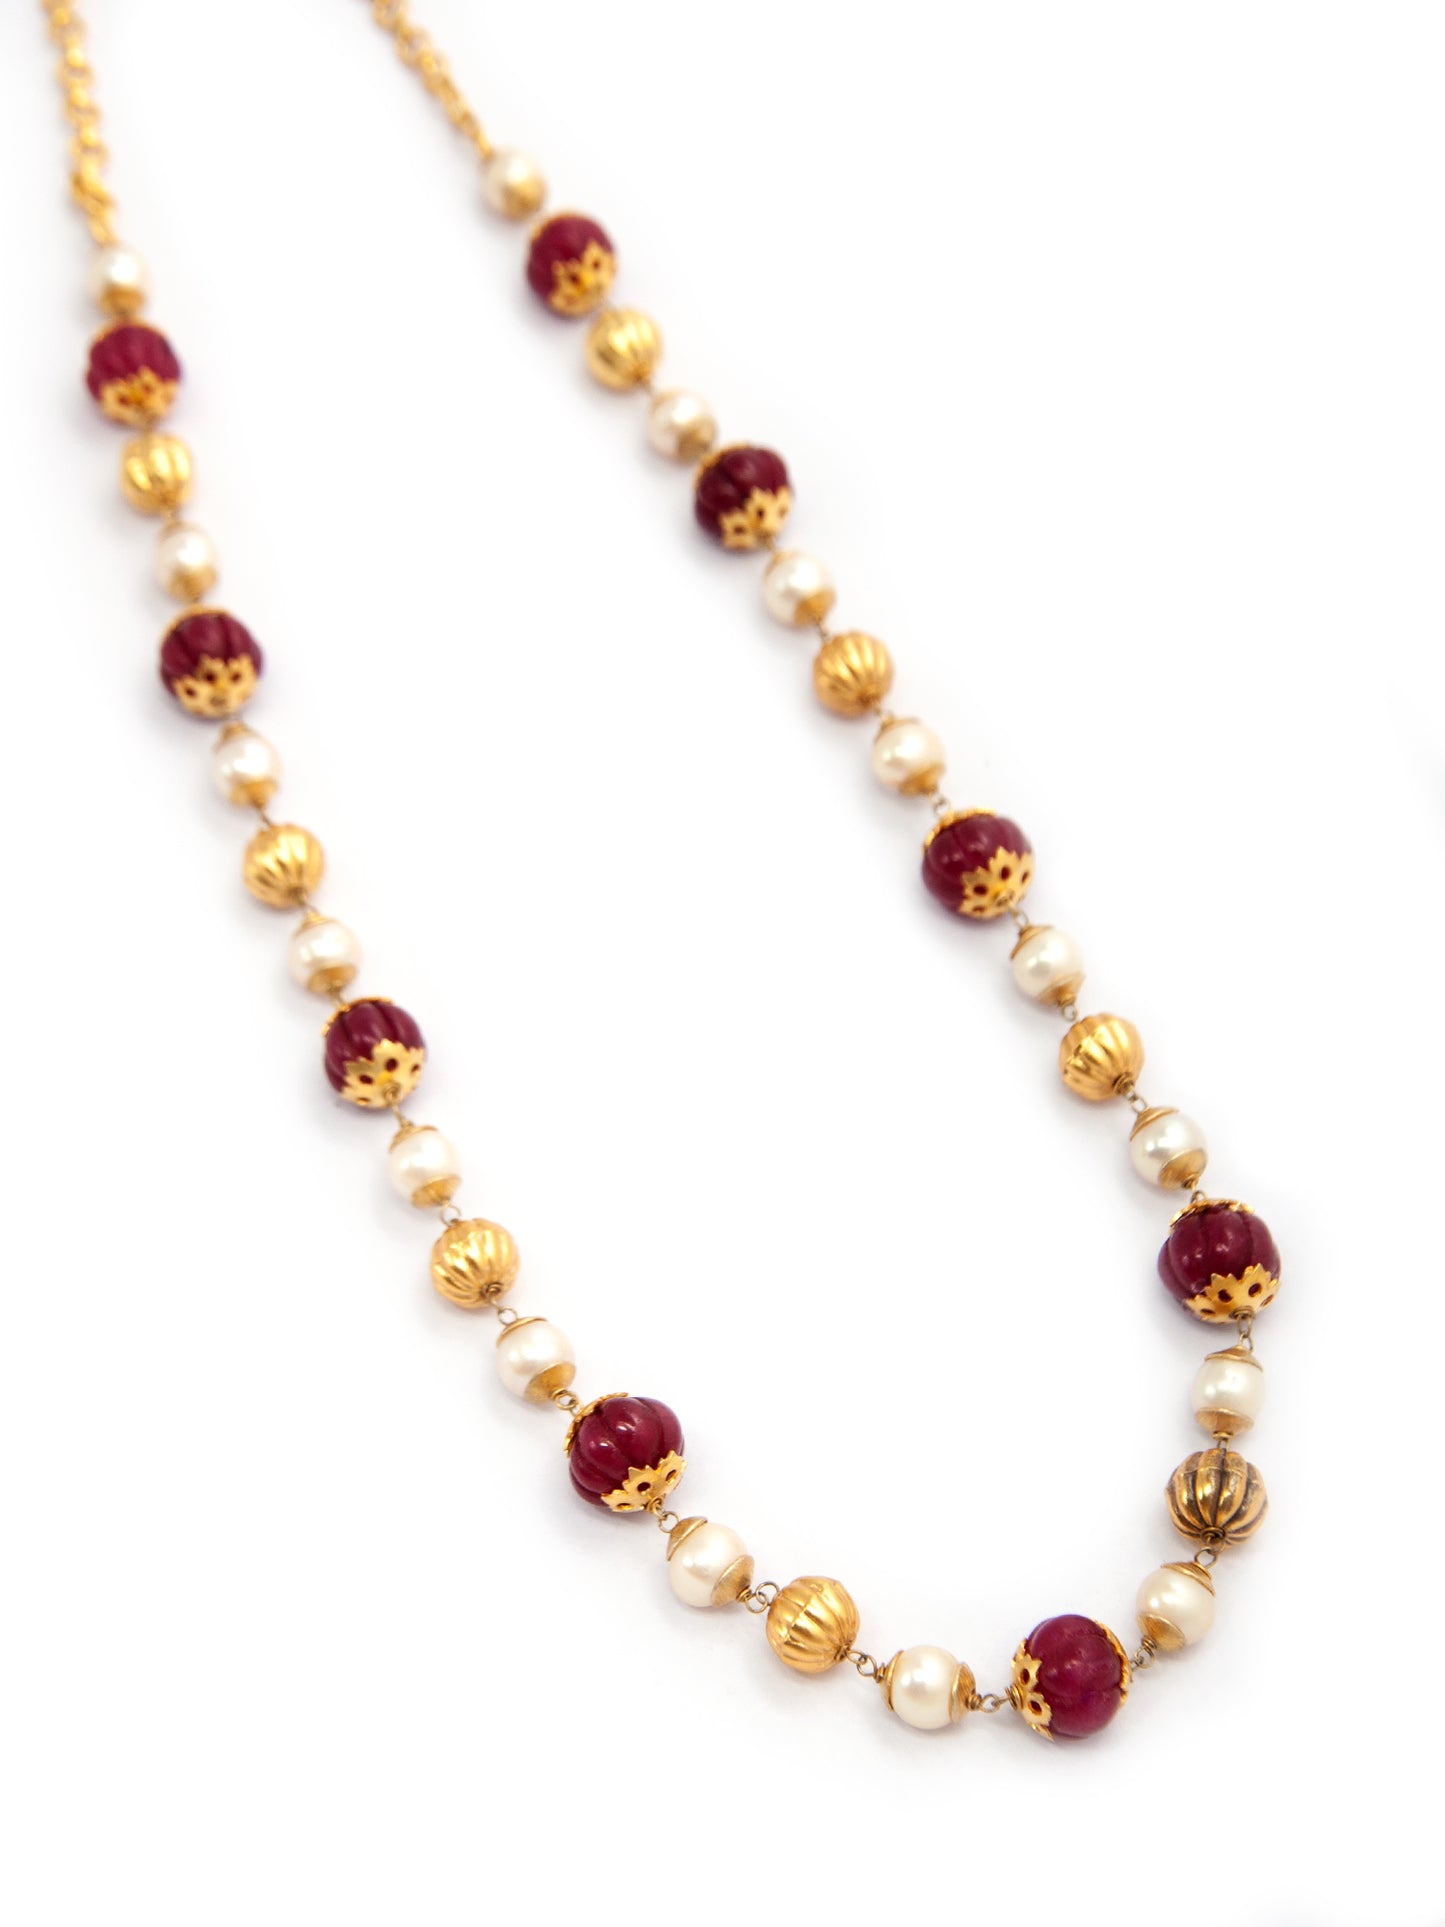 Scarlet Melon Radiance: 925 Silver Beaded Necklace with Red Melon Cut Beads